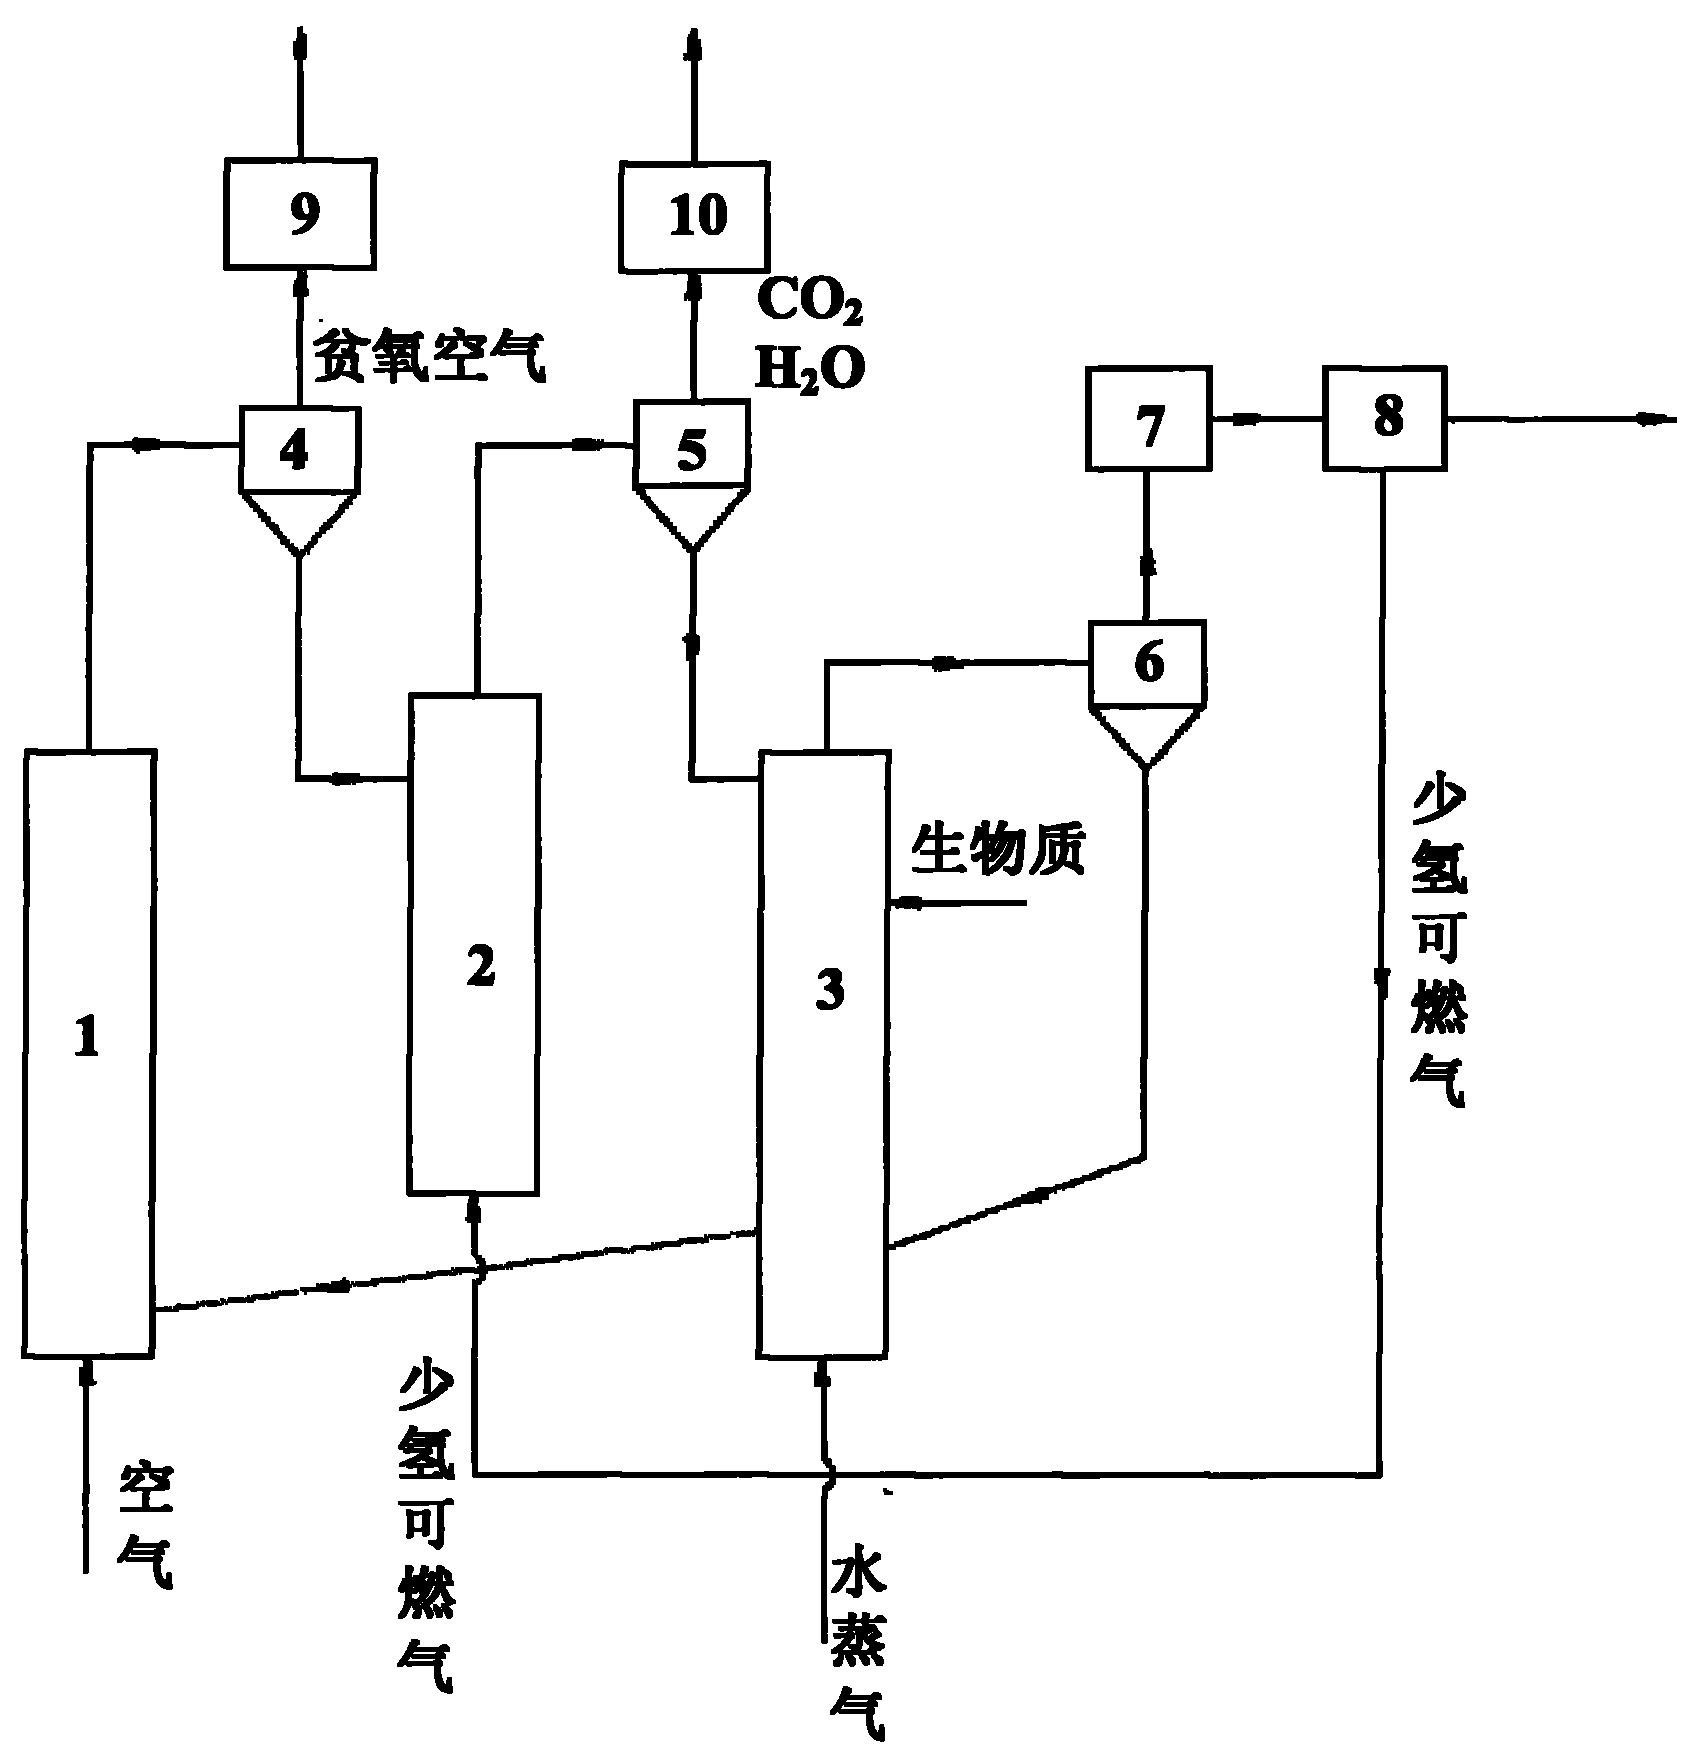 Biomass gasification hydrogen-producing system and method